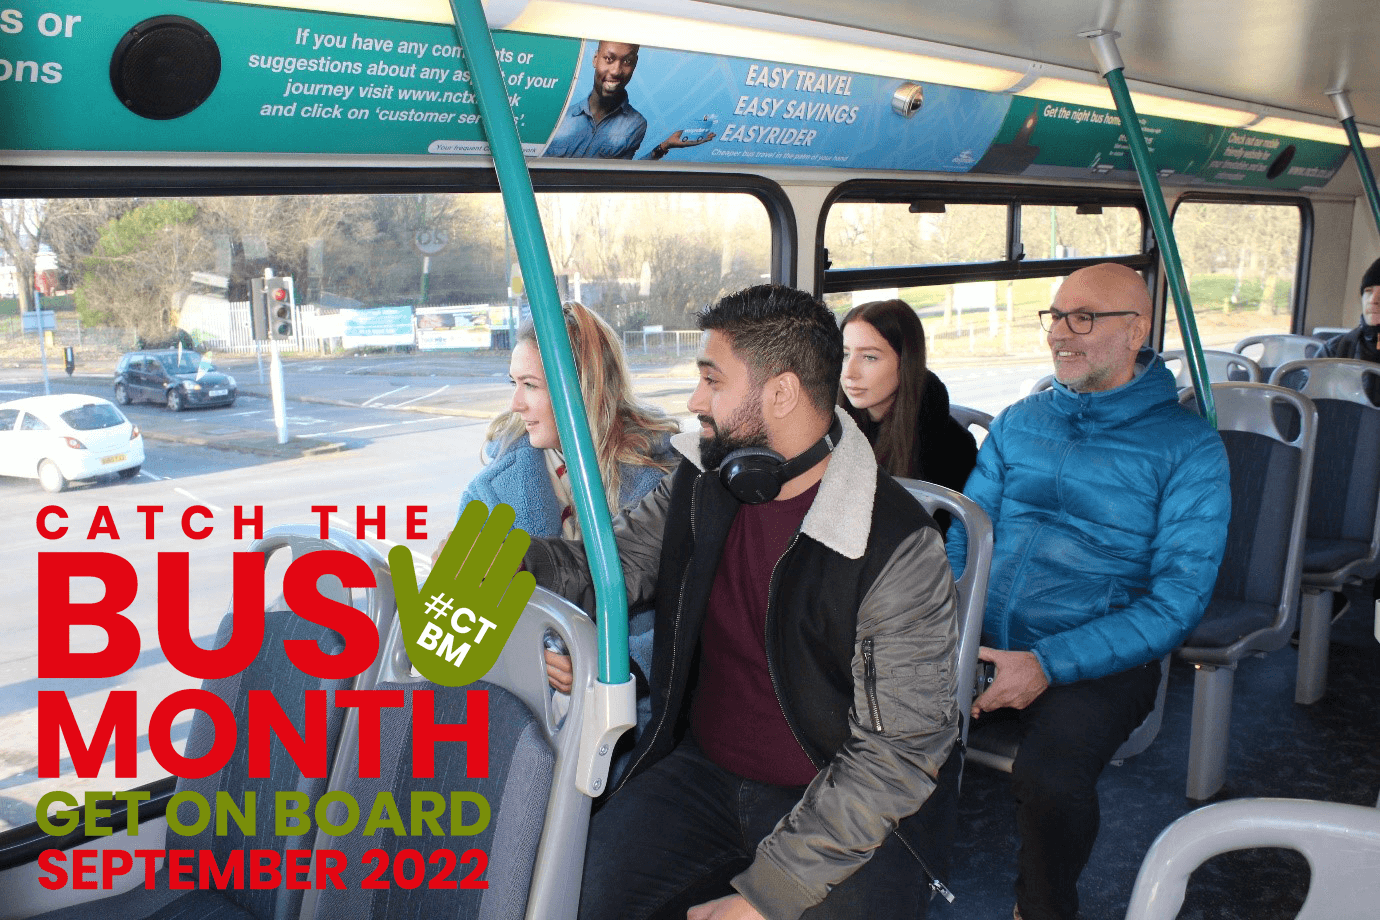 Passengers on a bus, with the Catch the Bus Month logo